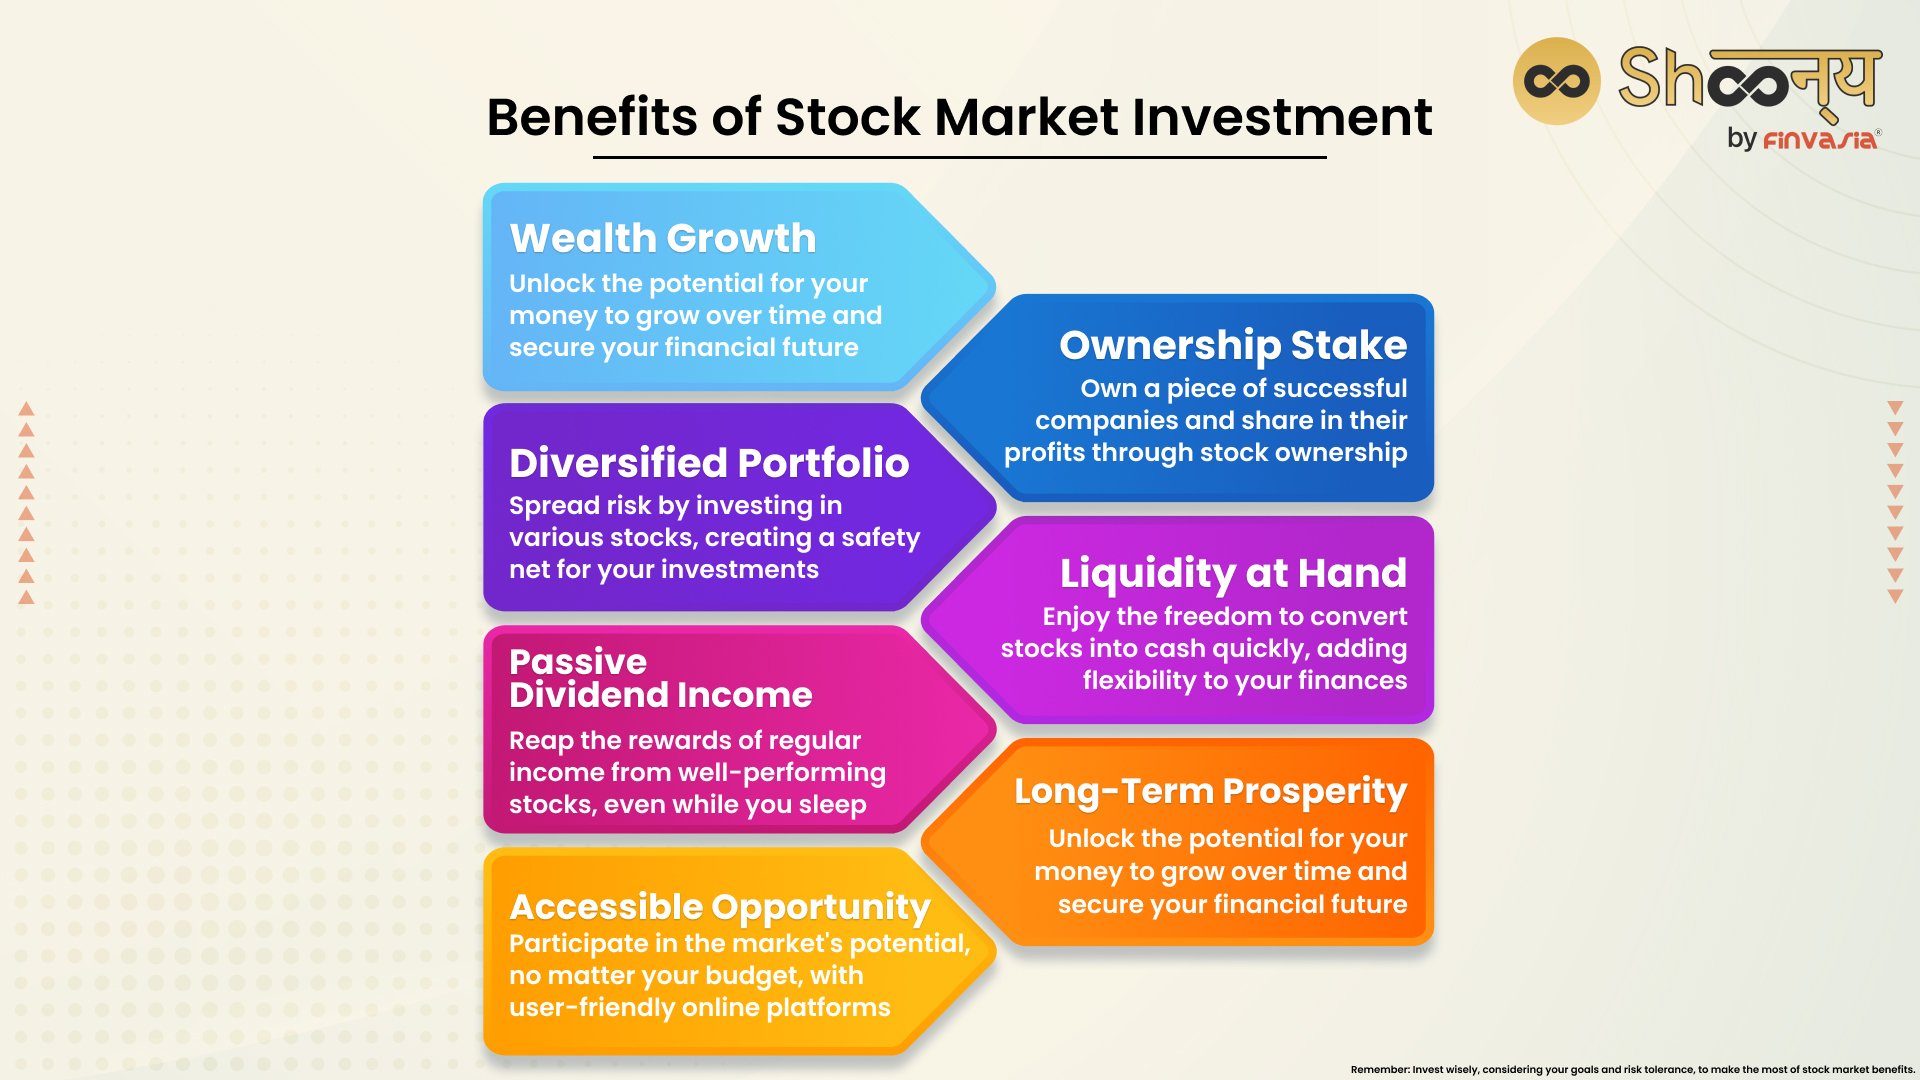 Benefits of Stock Market Investment